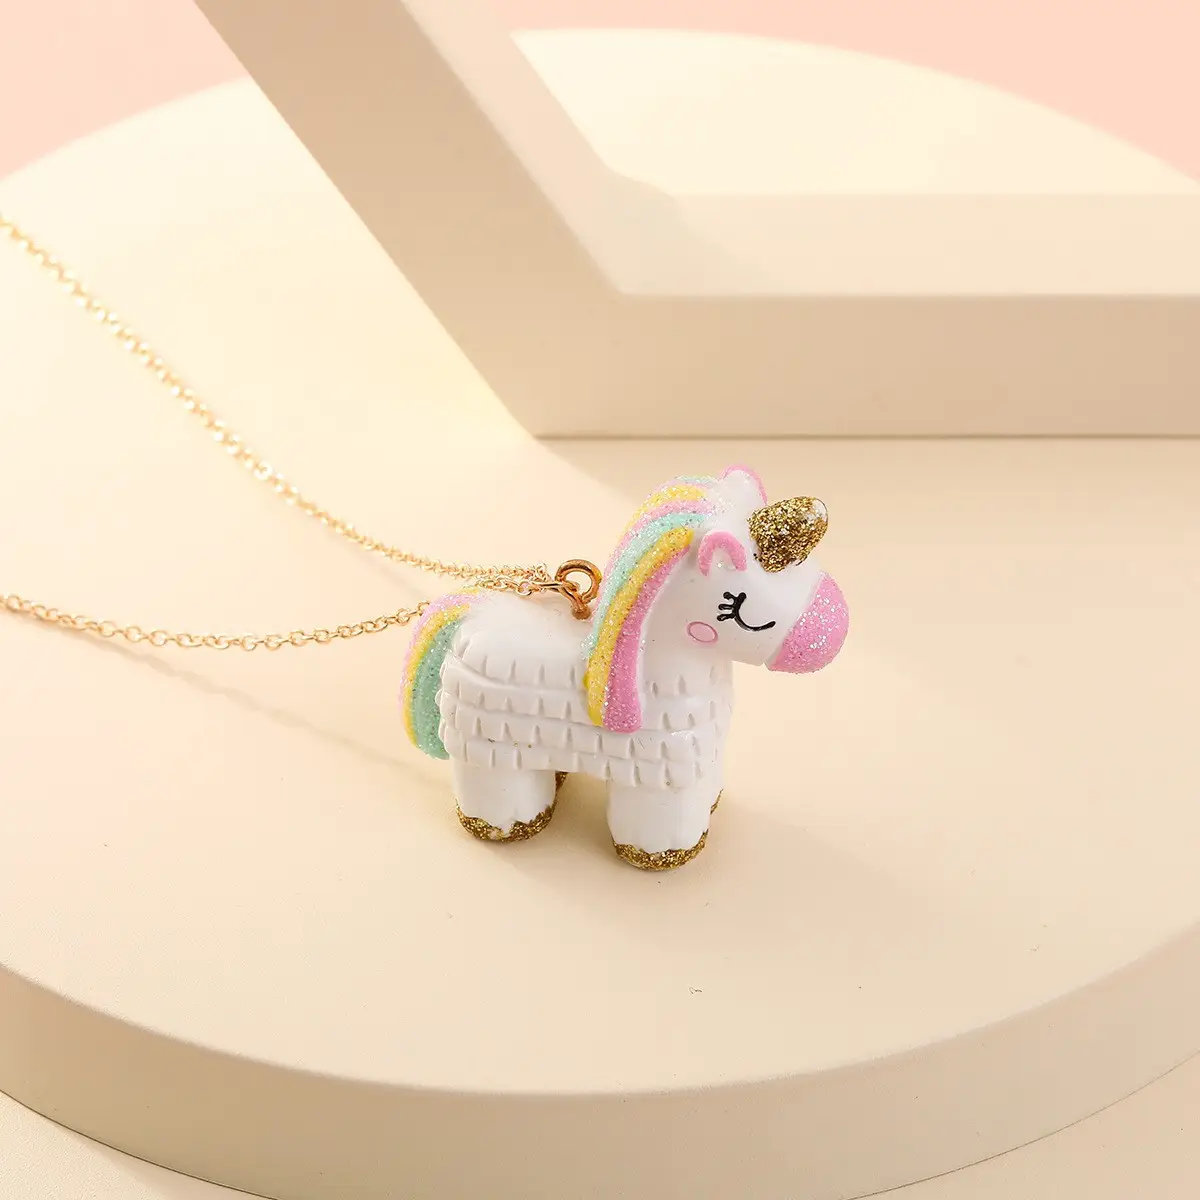 BXL23004 Cute Design Cartoon Rainbow Resin Unicorn Kids Necklace Pendant Jewelry Hot Sale Sweet Necklace Gifts For Kids Girls